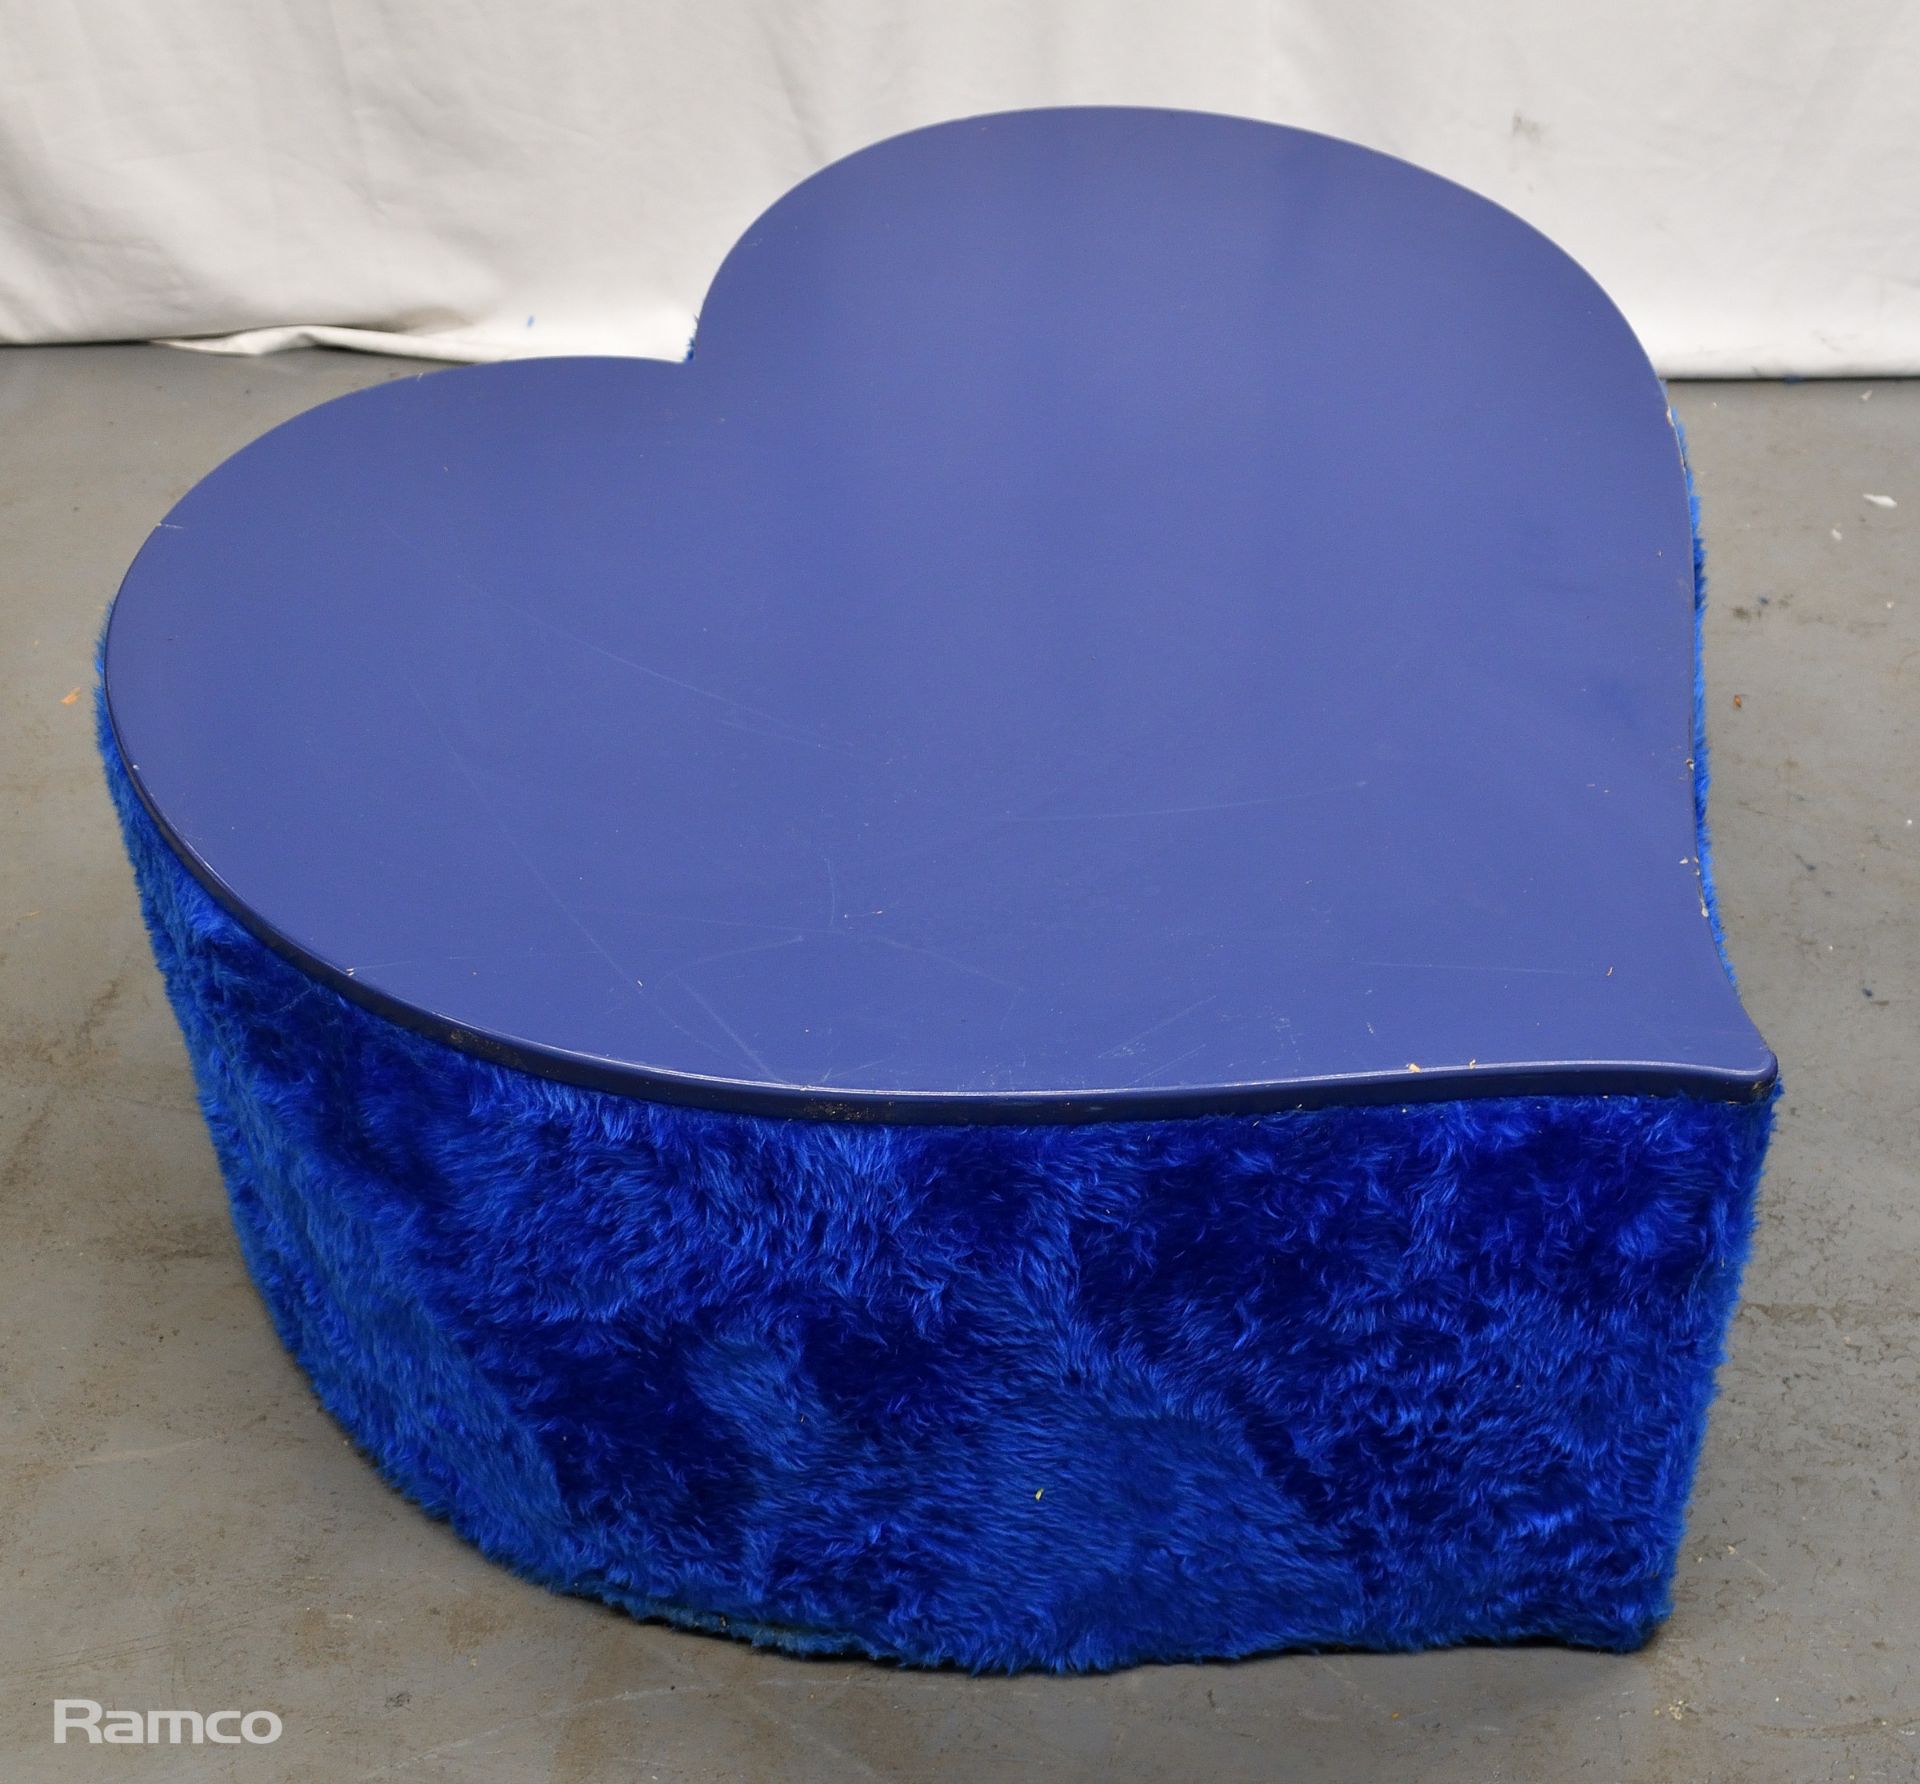 3x Asymmetrical heart shaped blue fur-covered wooden tables from countries' seating area - Image 3 of 13